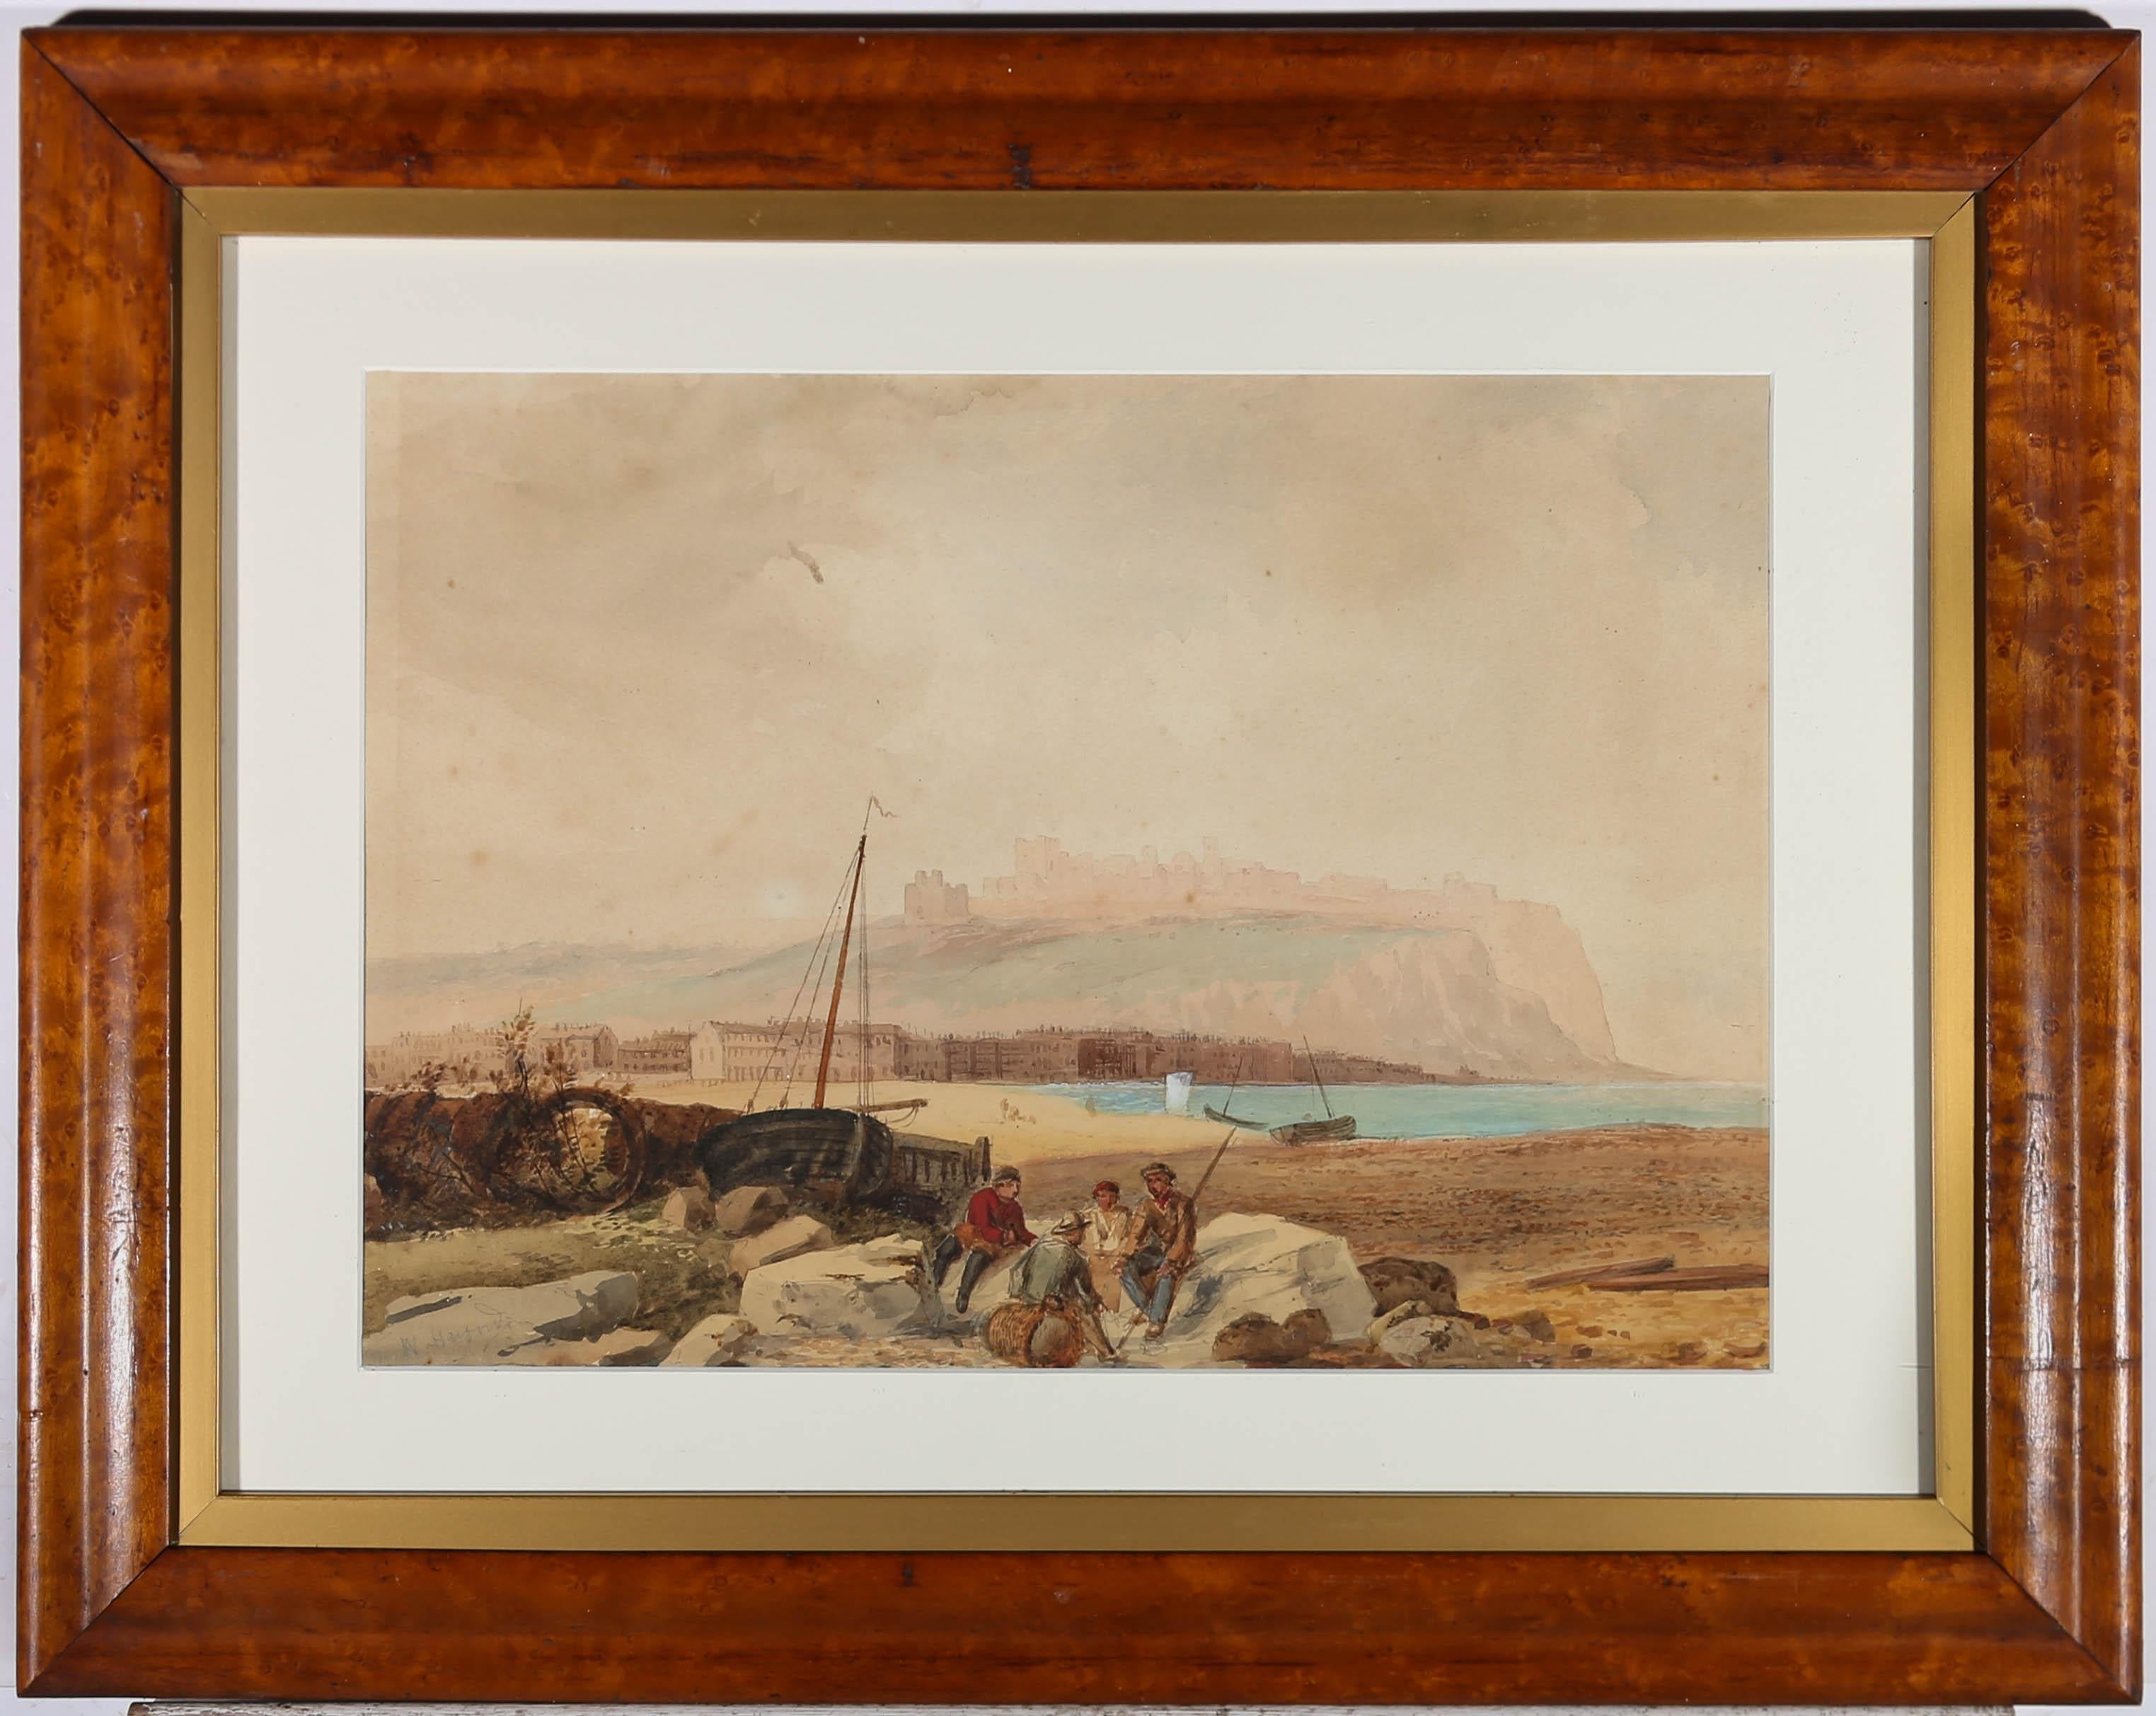 A fine watercolor seascape by William Harford, depicting fisherman gathered on rocks by the beach. A castle is just visible in the background, high up on a cliff. Signed in graphite to the lower left. Well presented in a fine maple frame, with gilt